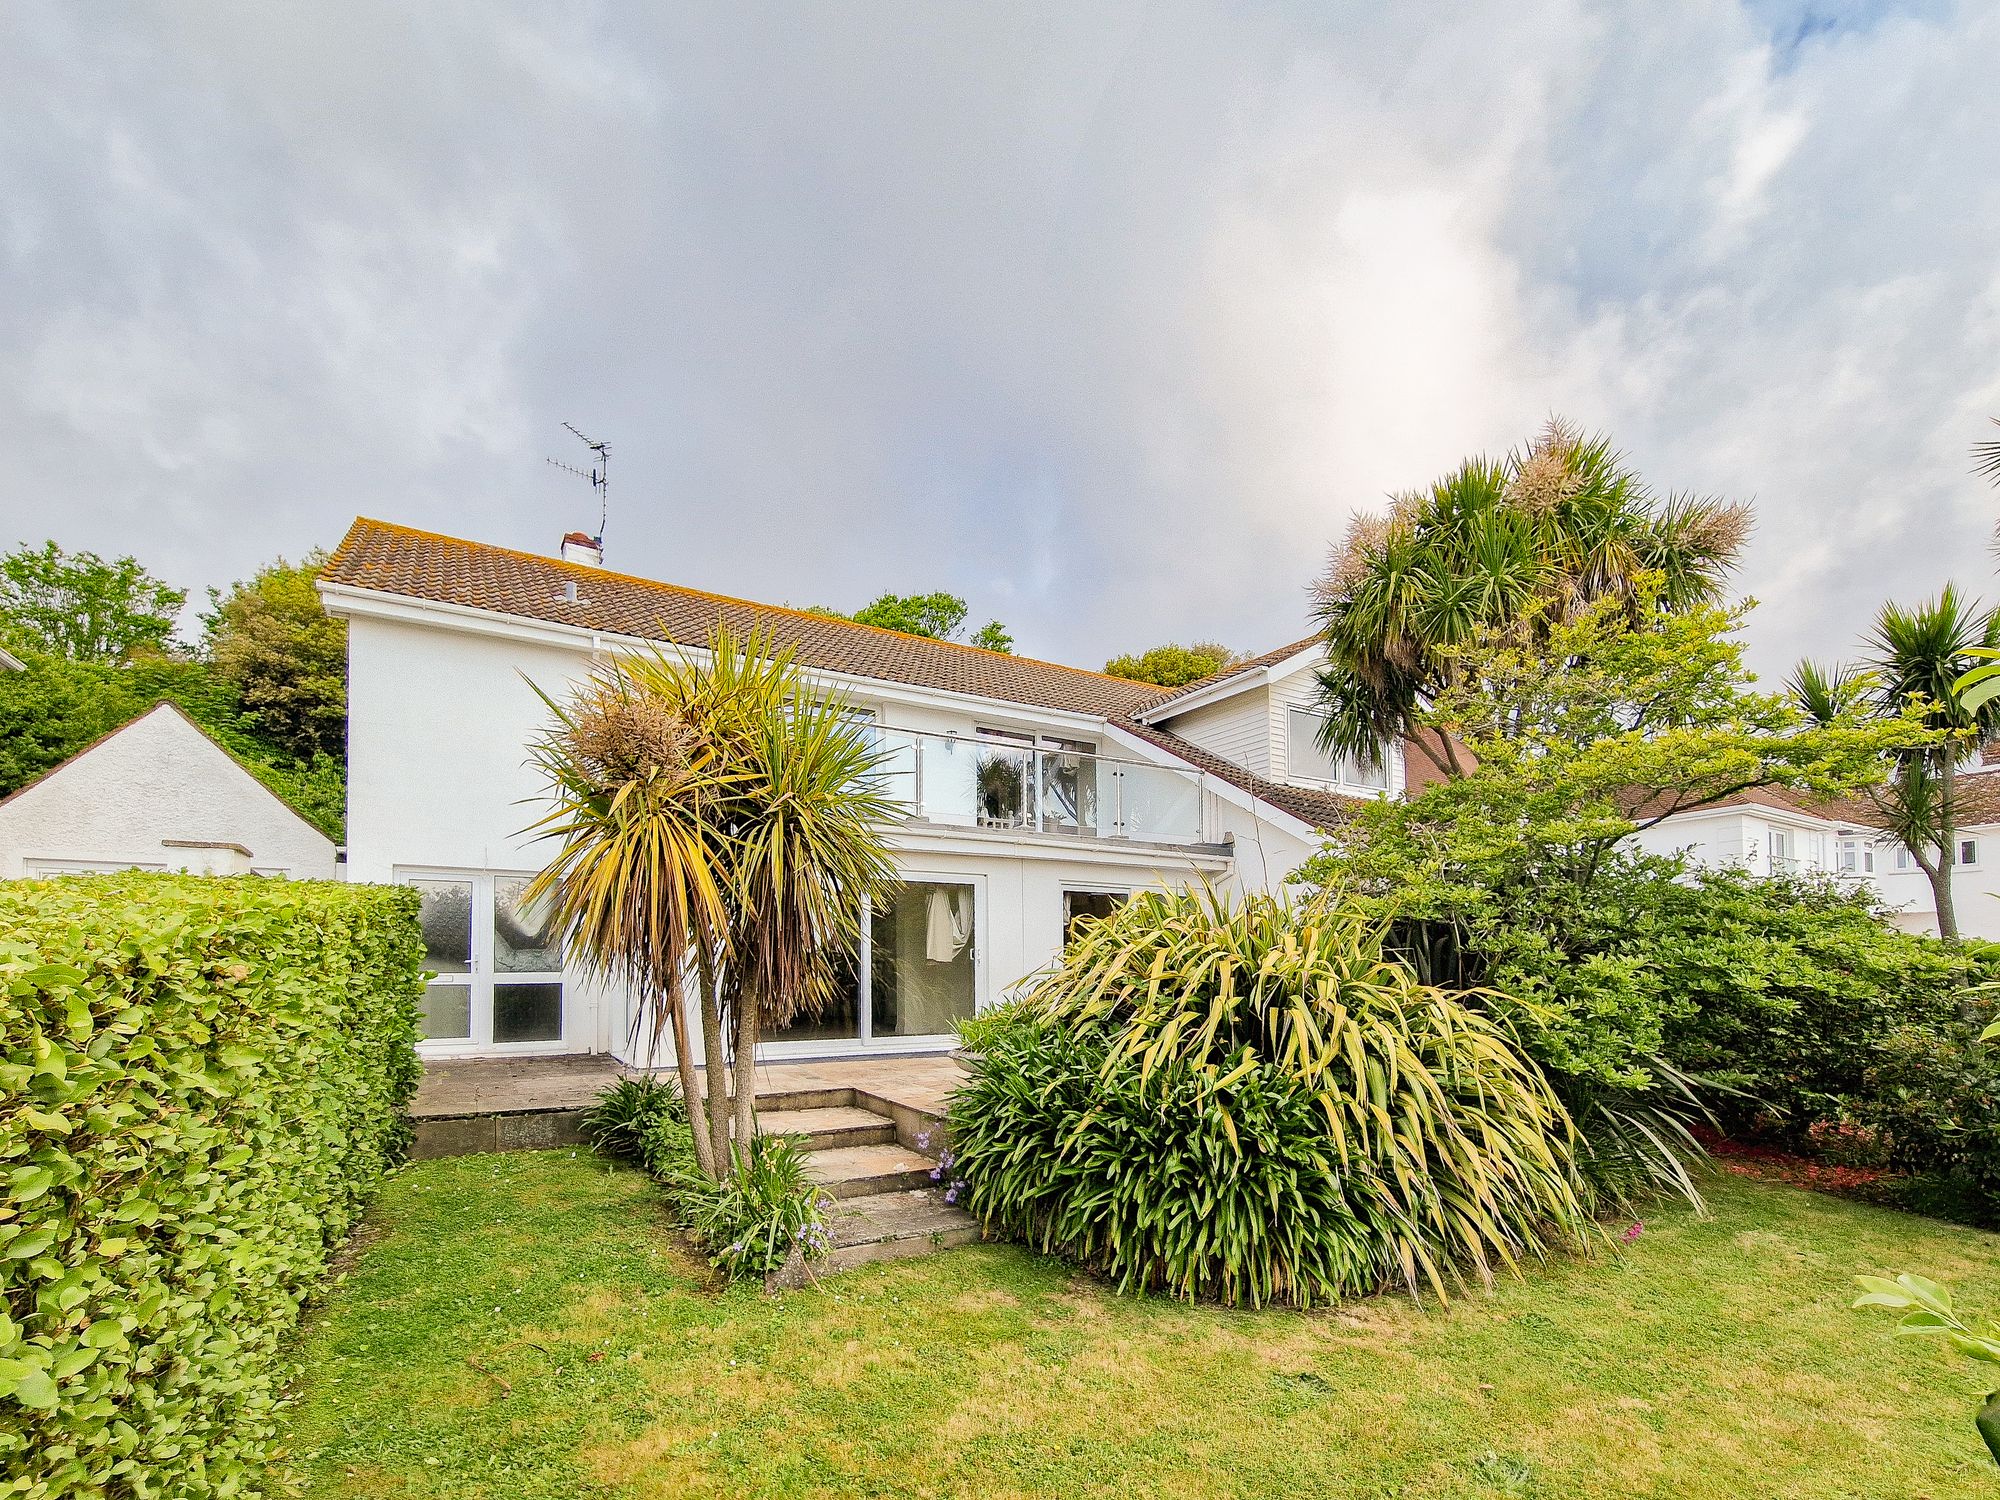 4 bed Property For Rent in St. Helier, Jersey